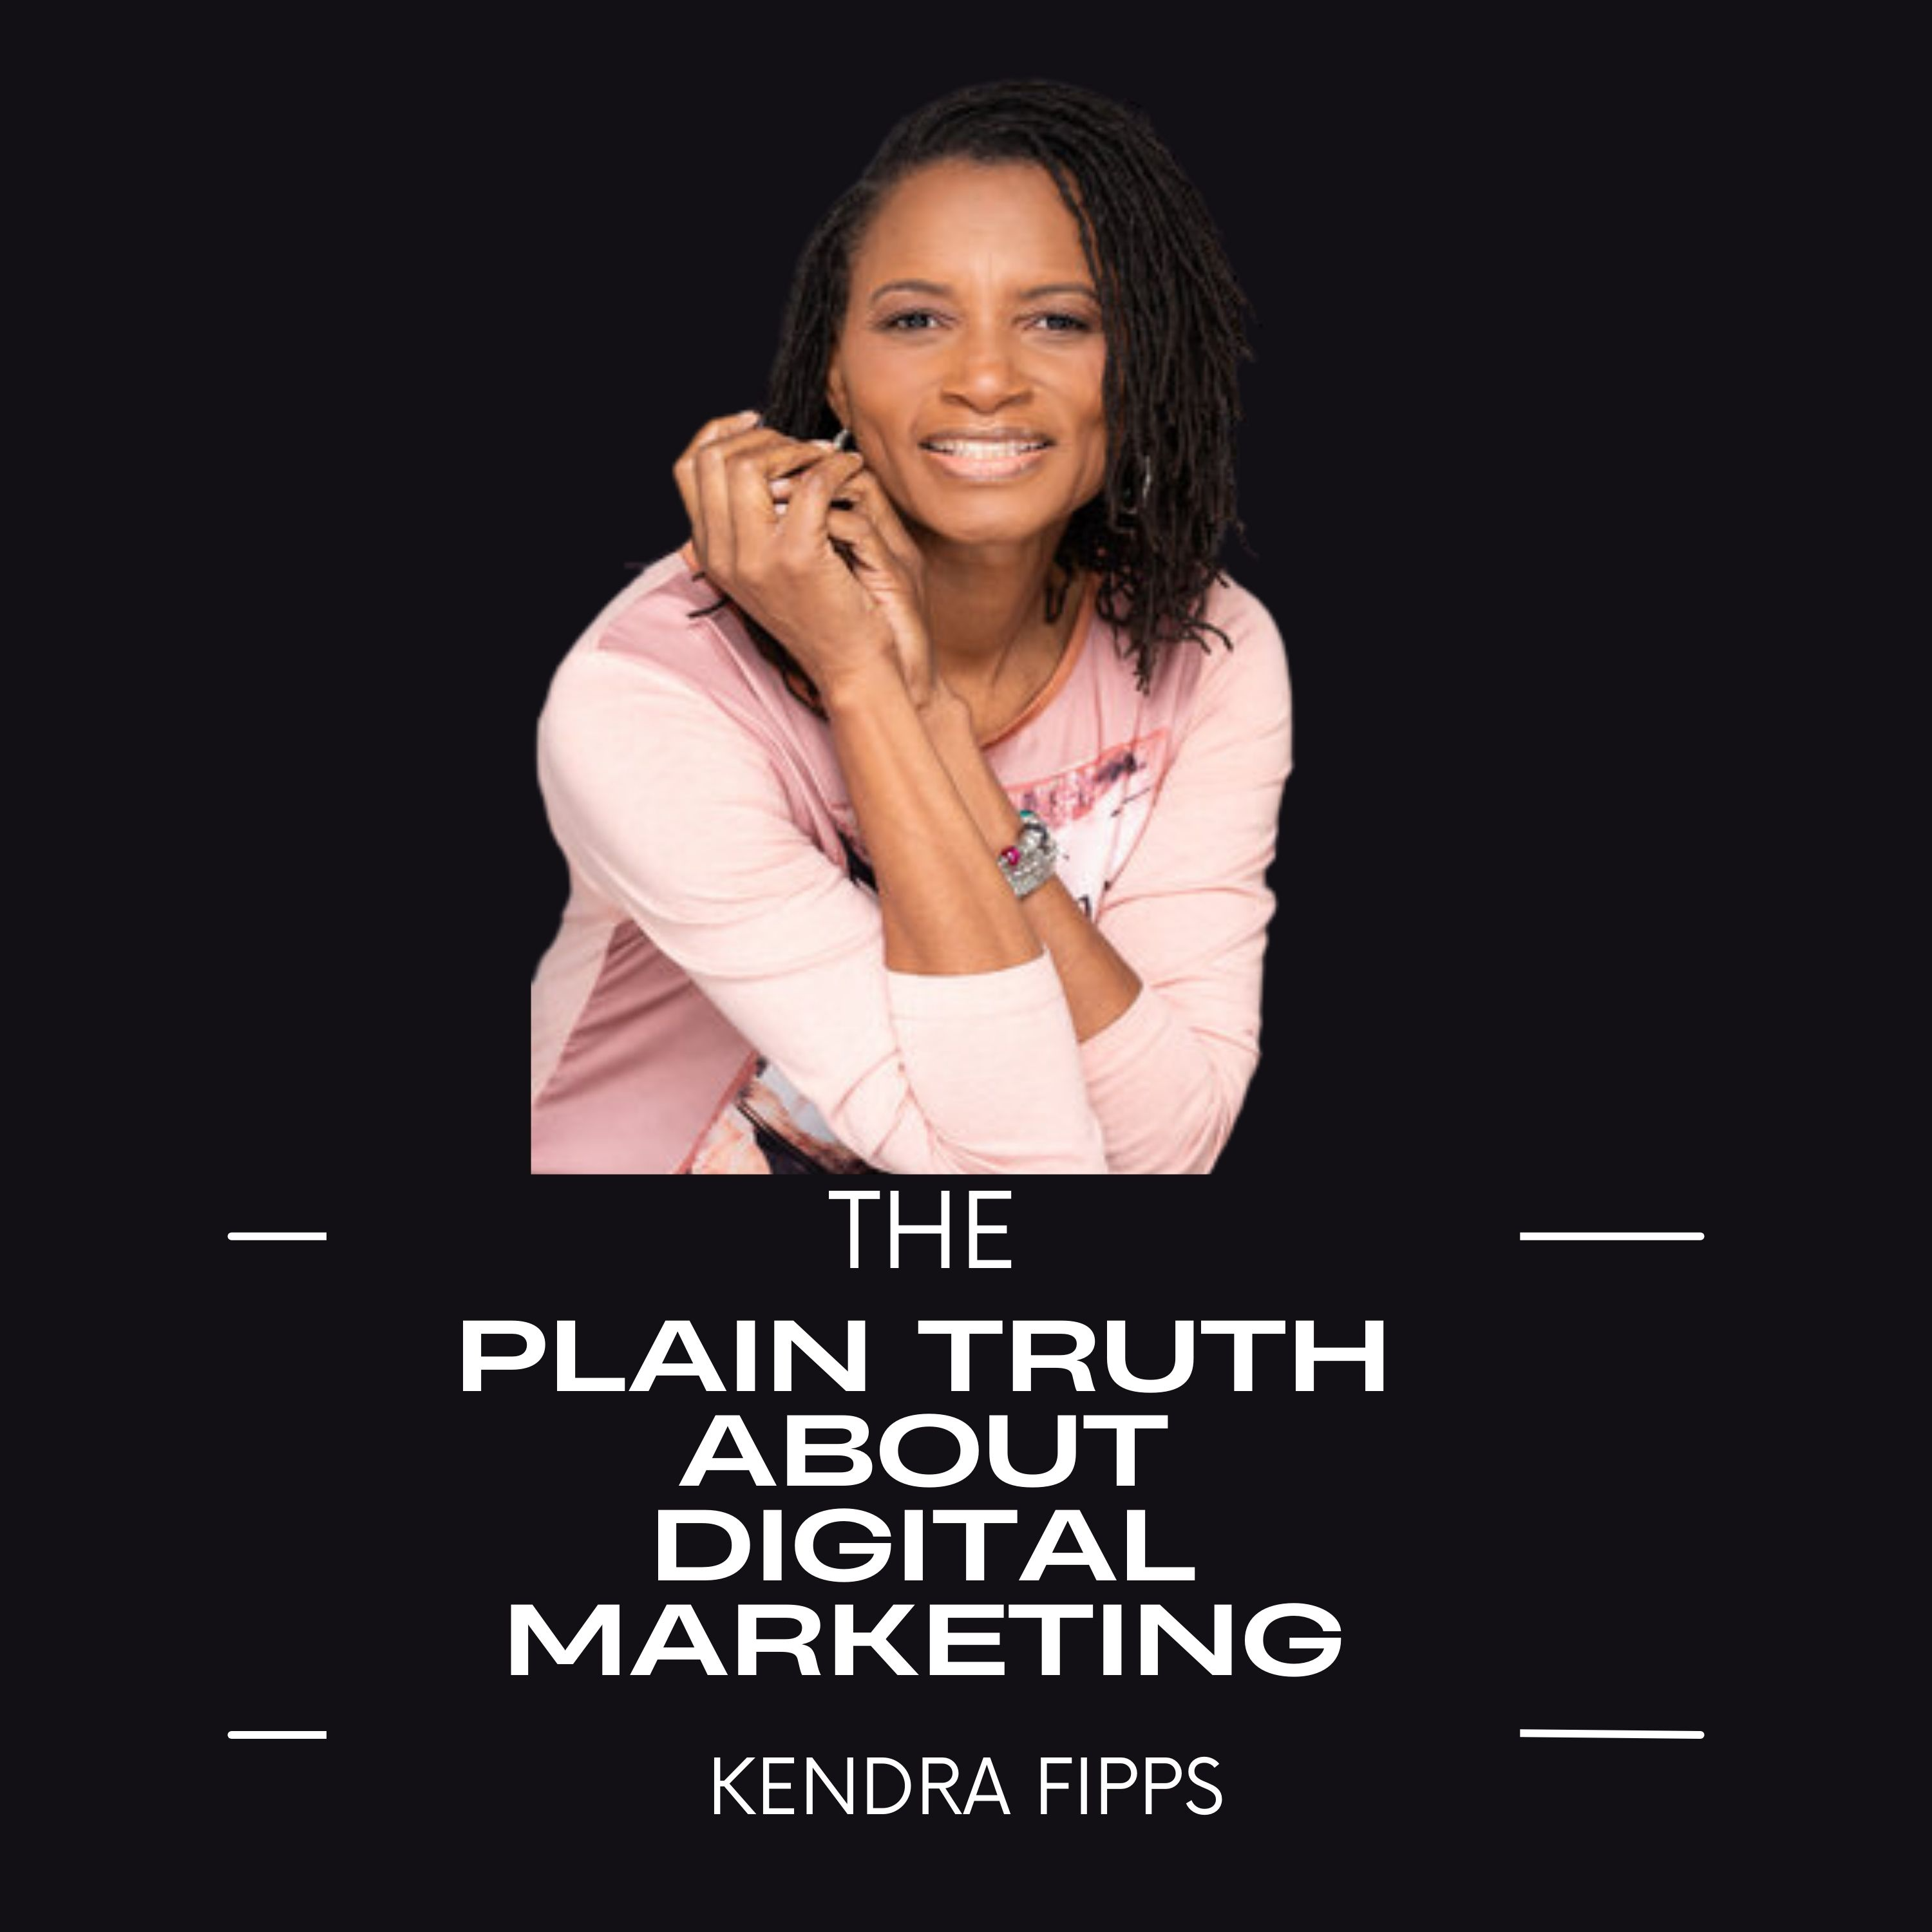 The Plain Truth About Digital Marketing